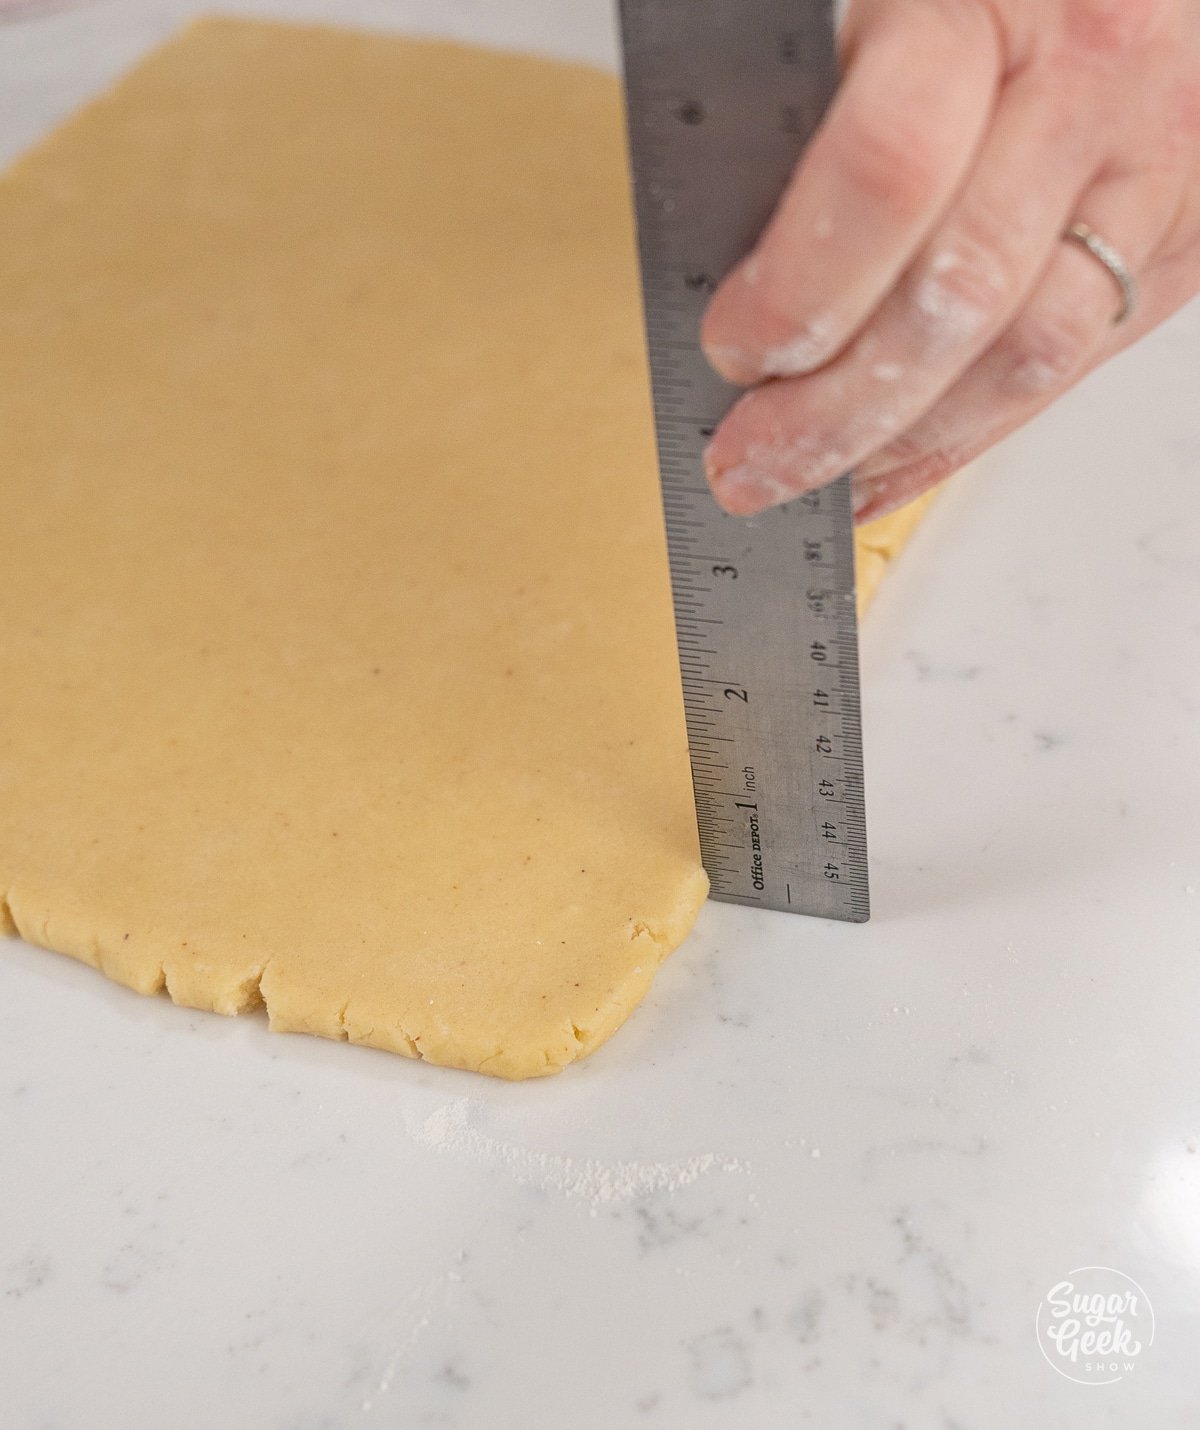 Ruler places along dough to show 1/4 inch.